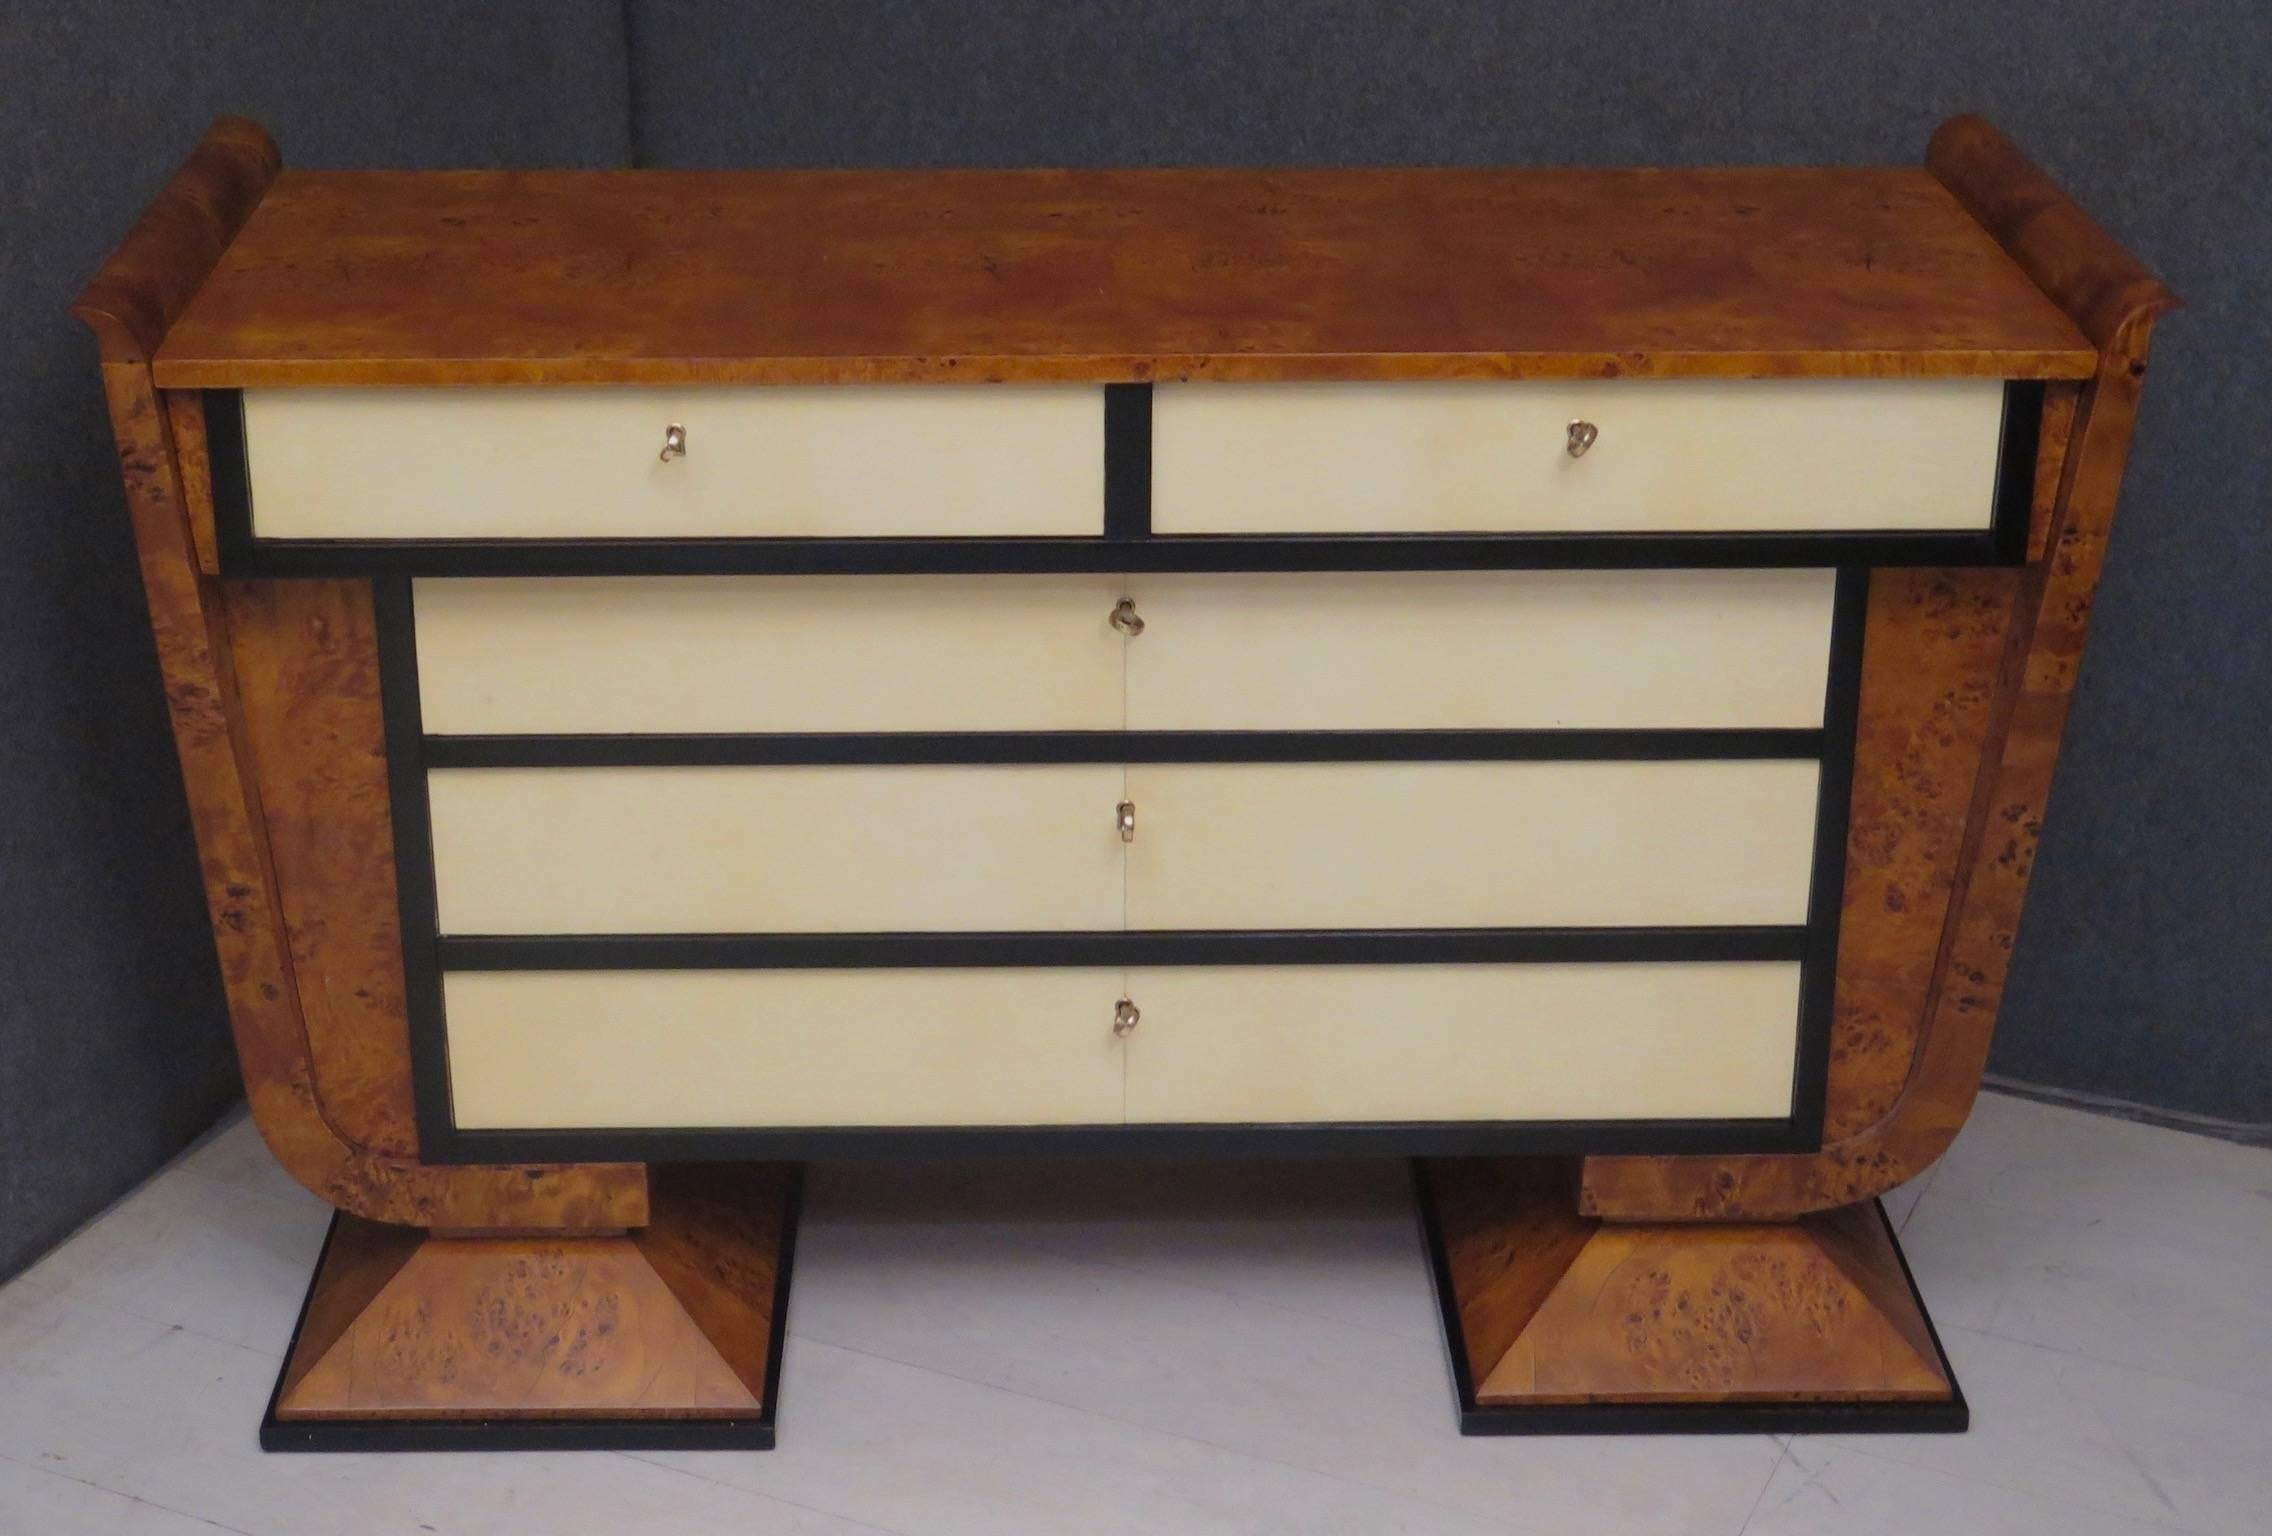 Italian Art Deco dresser. Body all veneered in poplar burl. On the front the five drawers instead are covered in parchment leather. The drawers, as we can see from the photos, all around have a black lacquer frame. It can be opened by means of a key